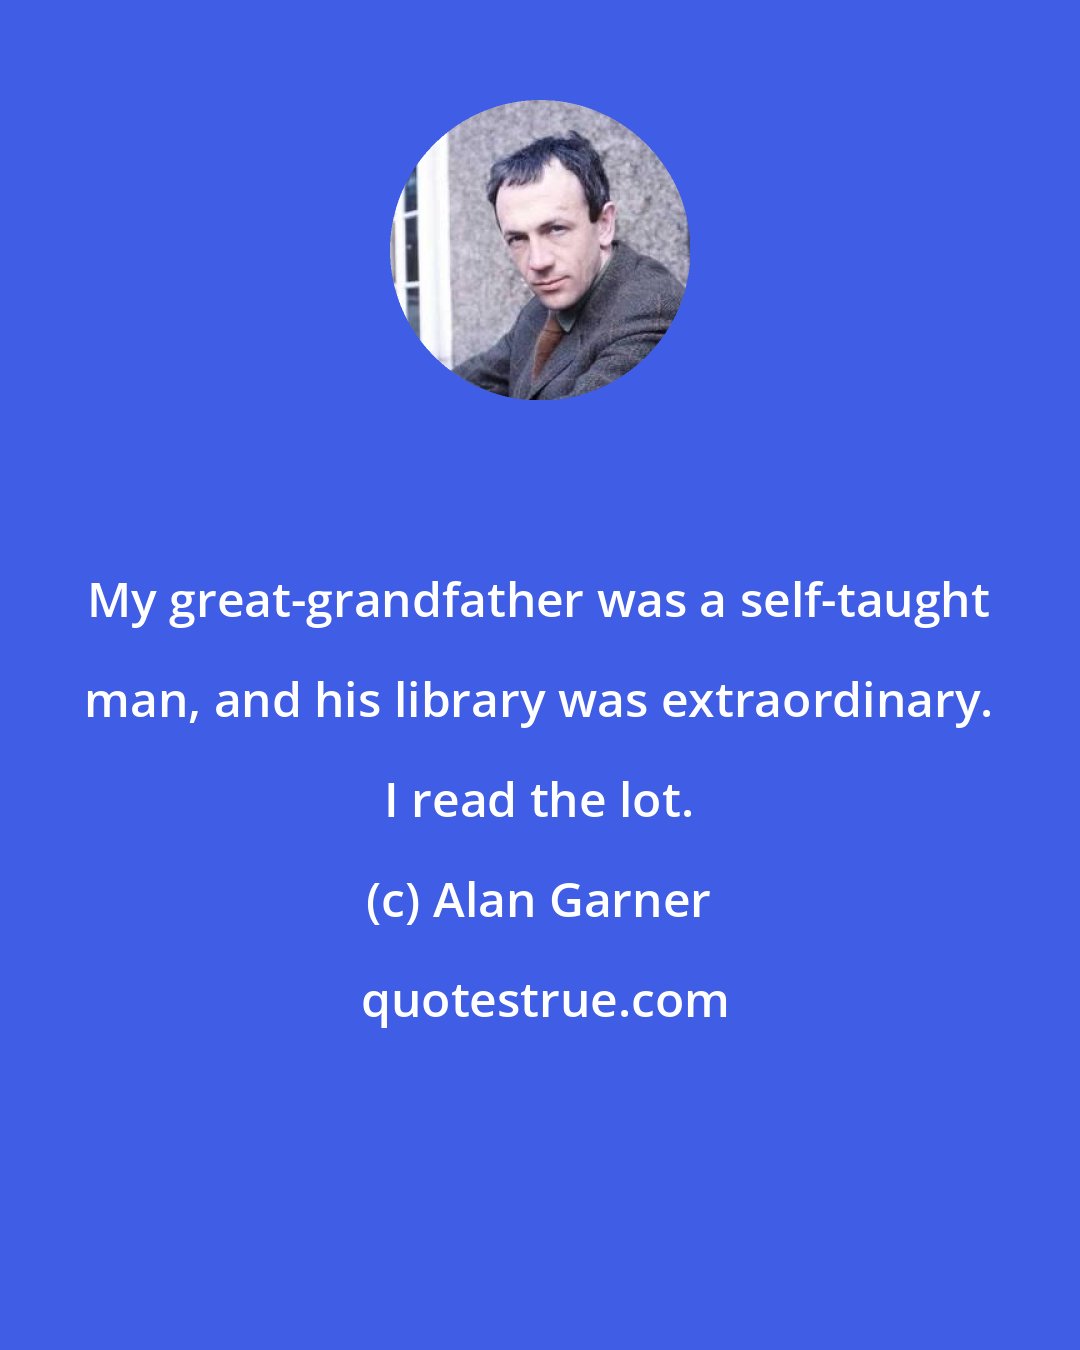 Alan Garner: My great-grandfather was a self-taught man, and his library was extraordinary. I read the lot.